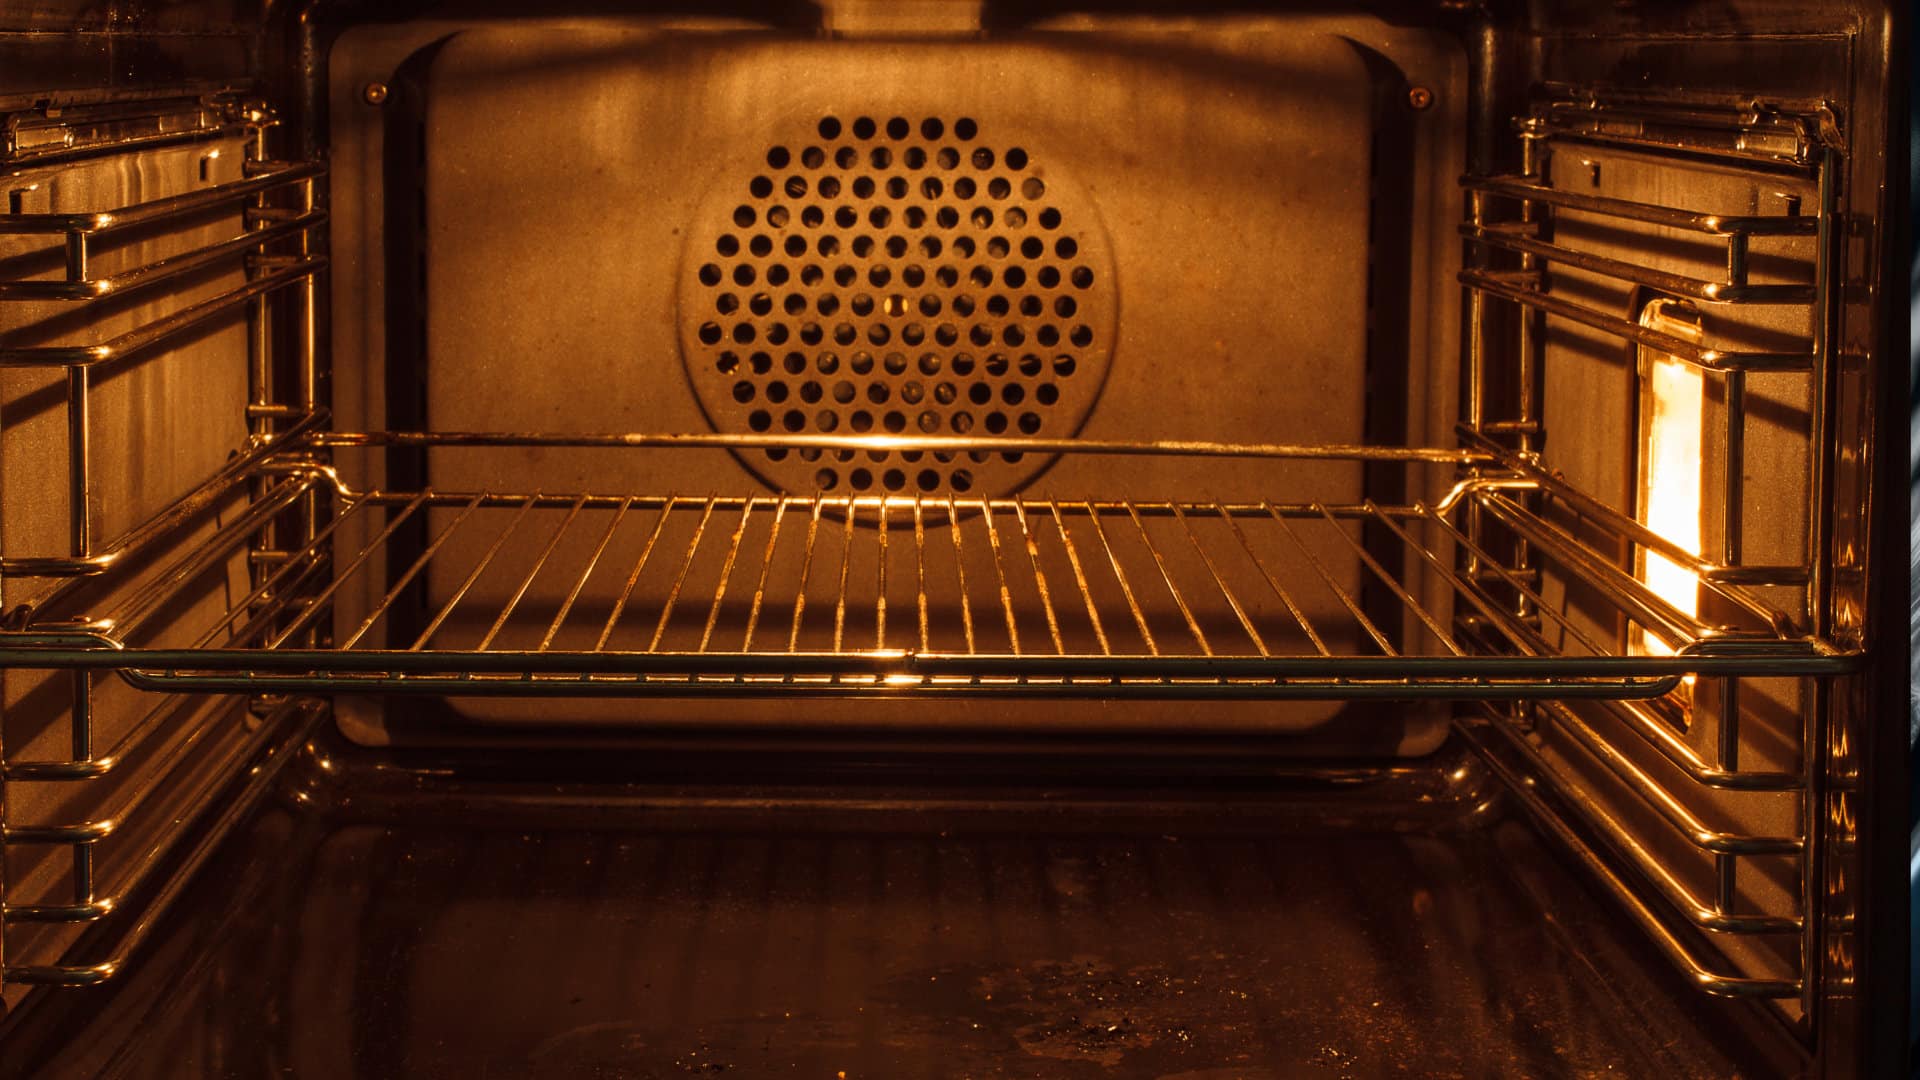 Featured image for “Oven Making Clicking Noise: How to Fix It”